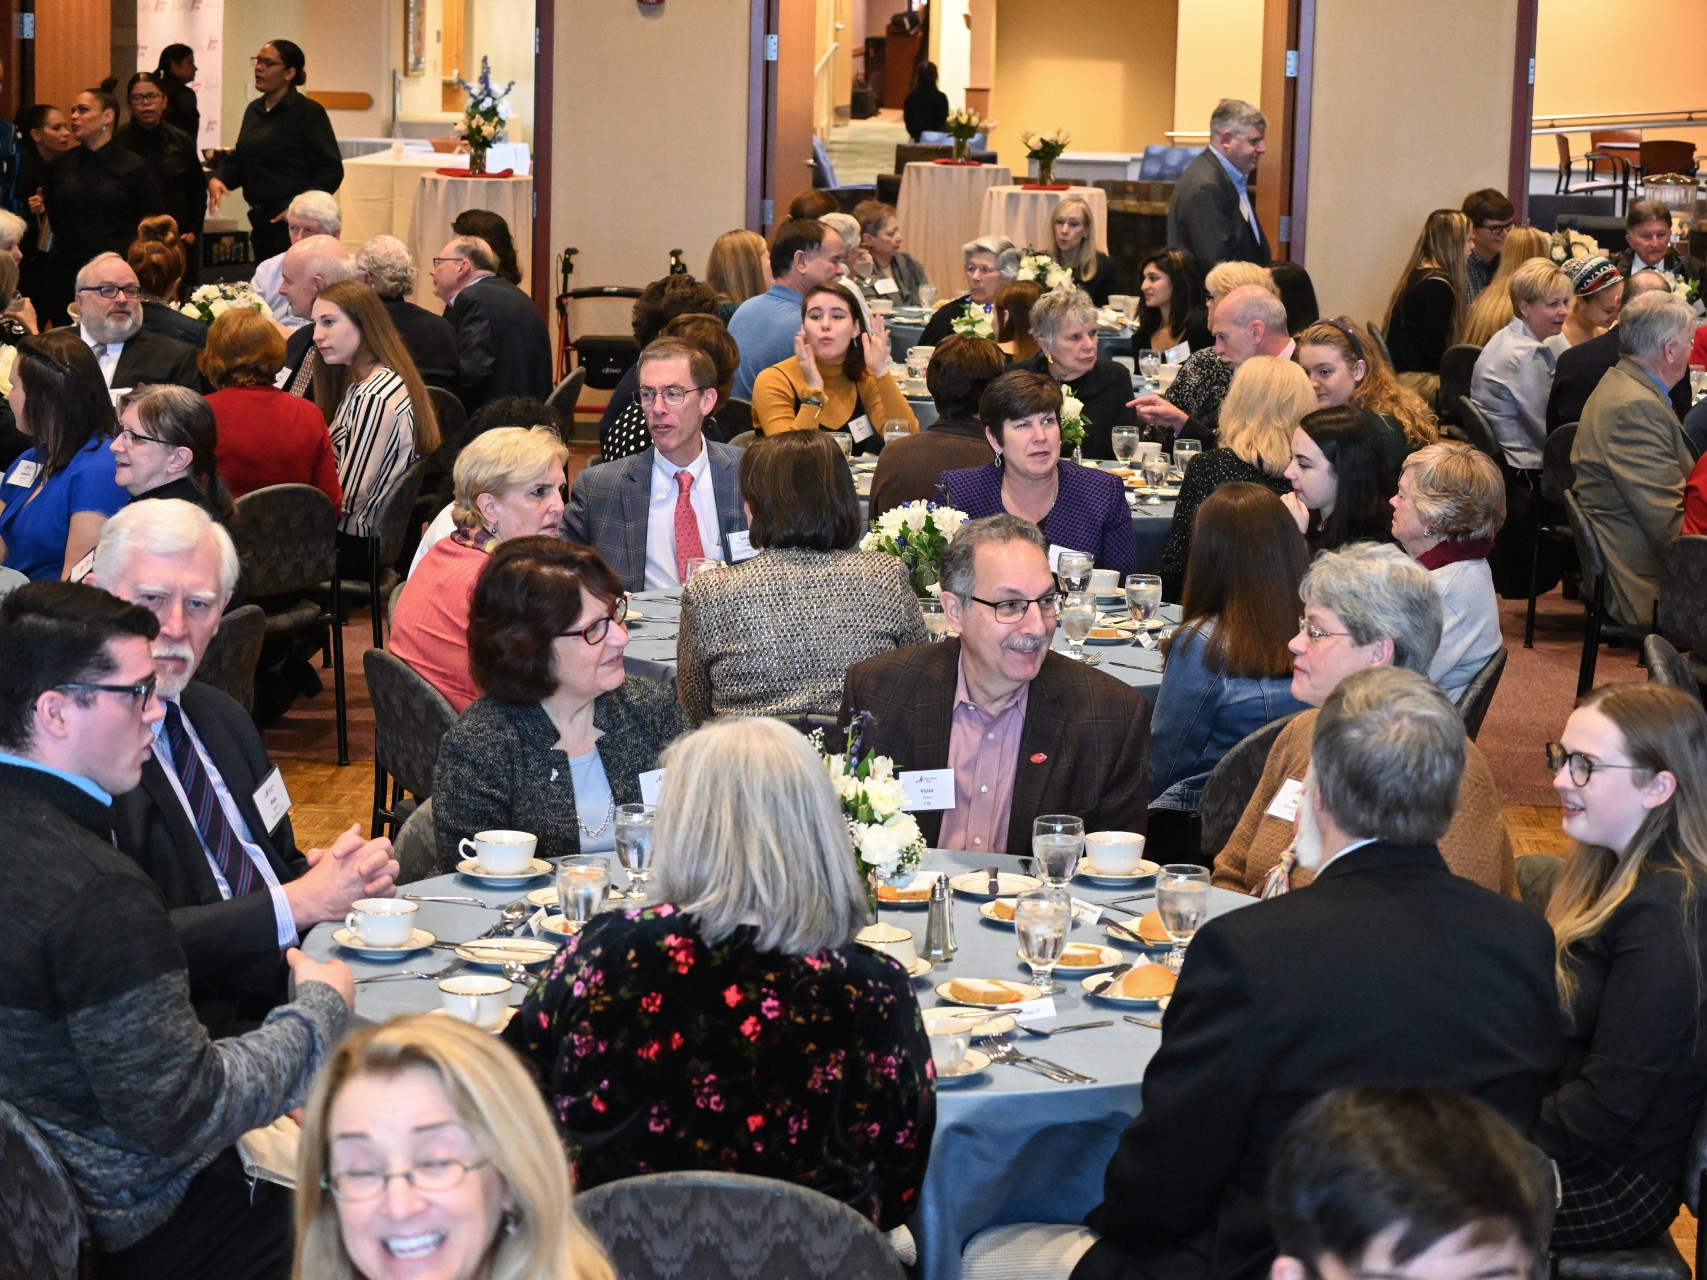 Students and faculty share food and fellowship during the annual Scholarship Luncheon event.